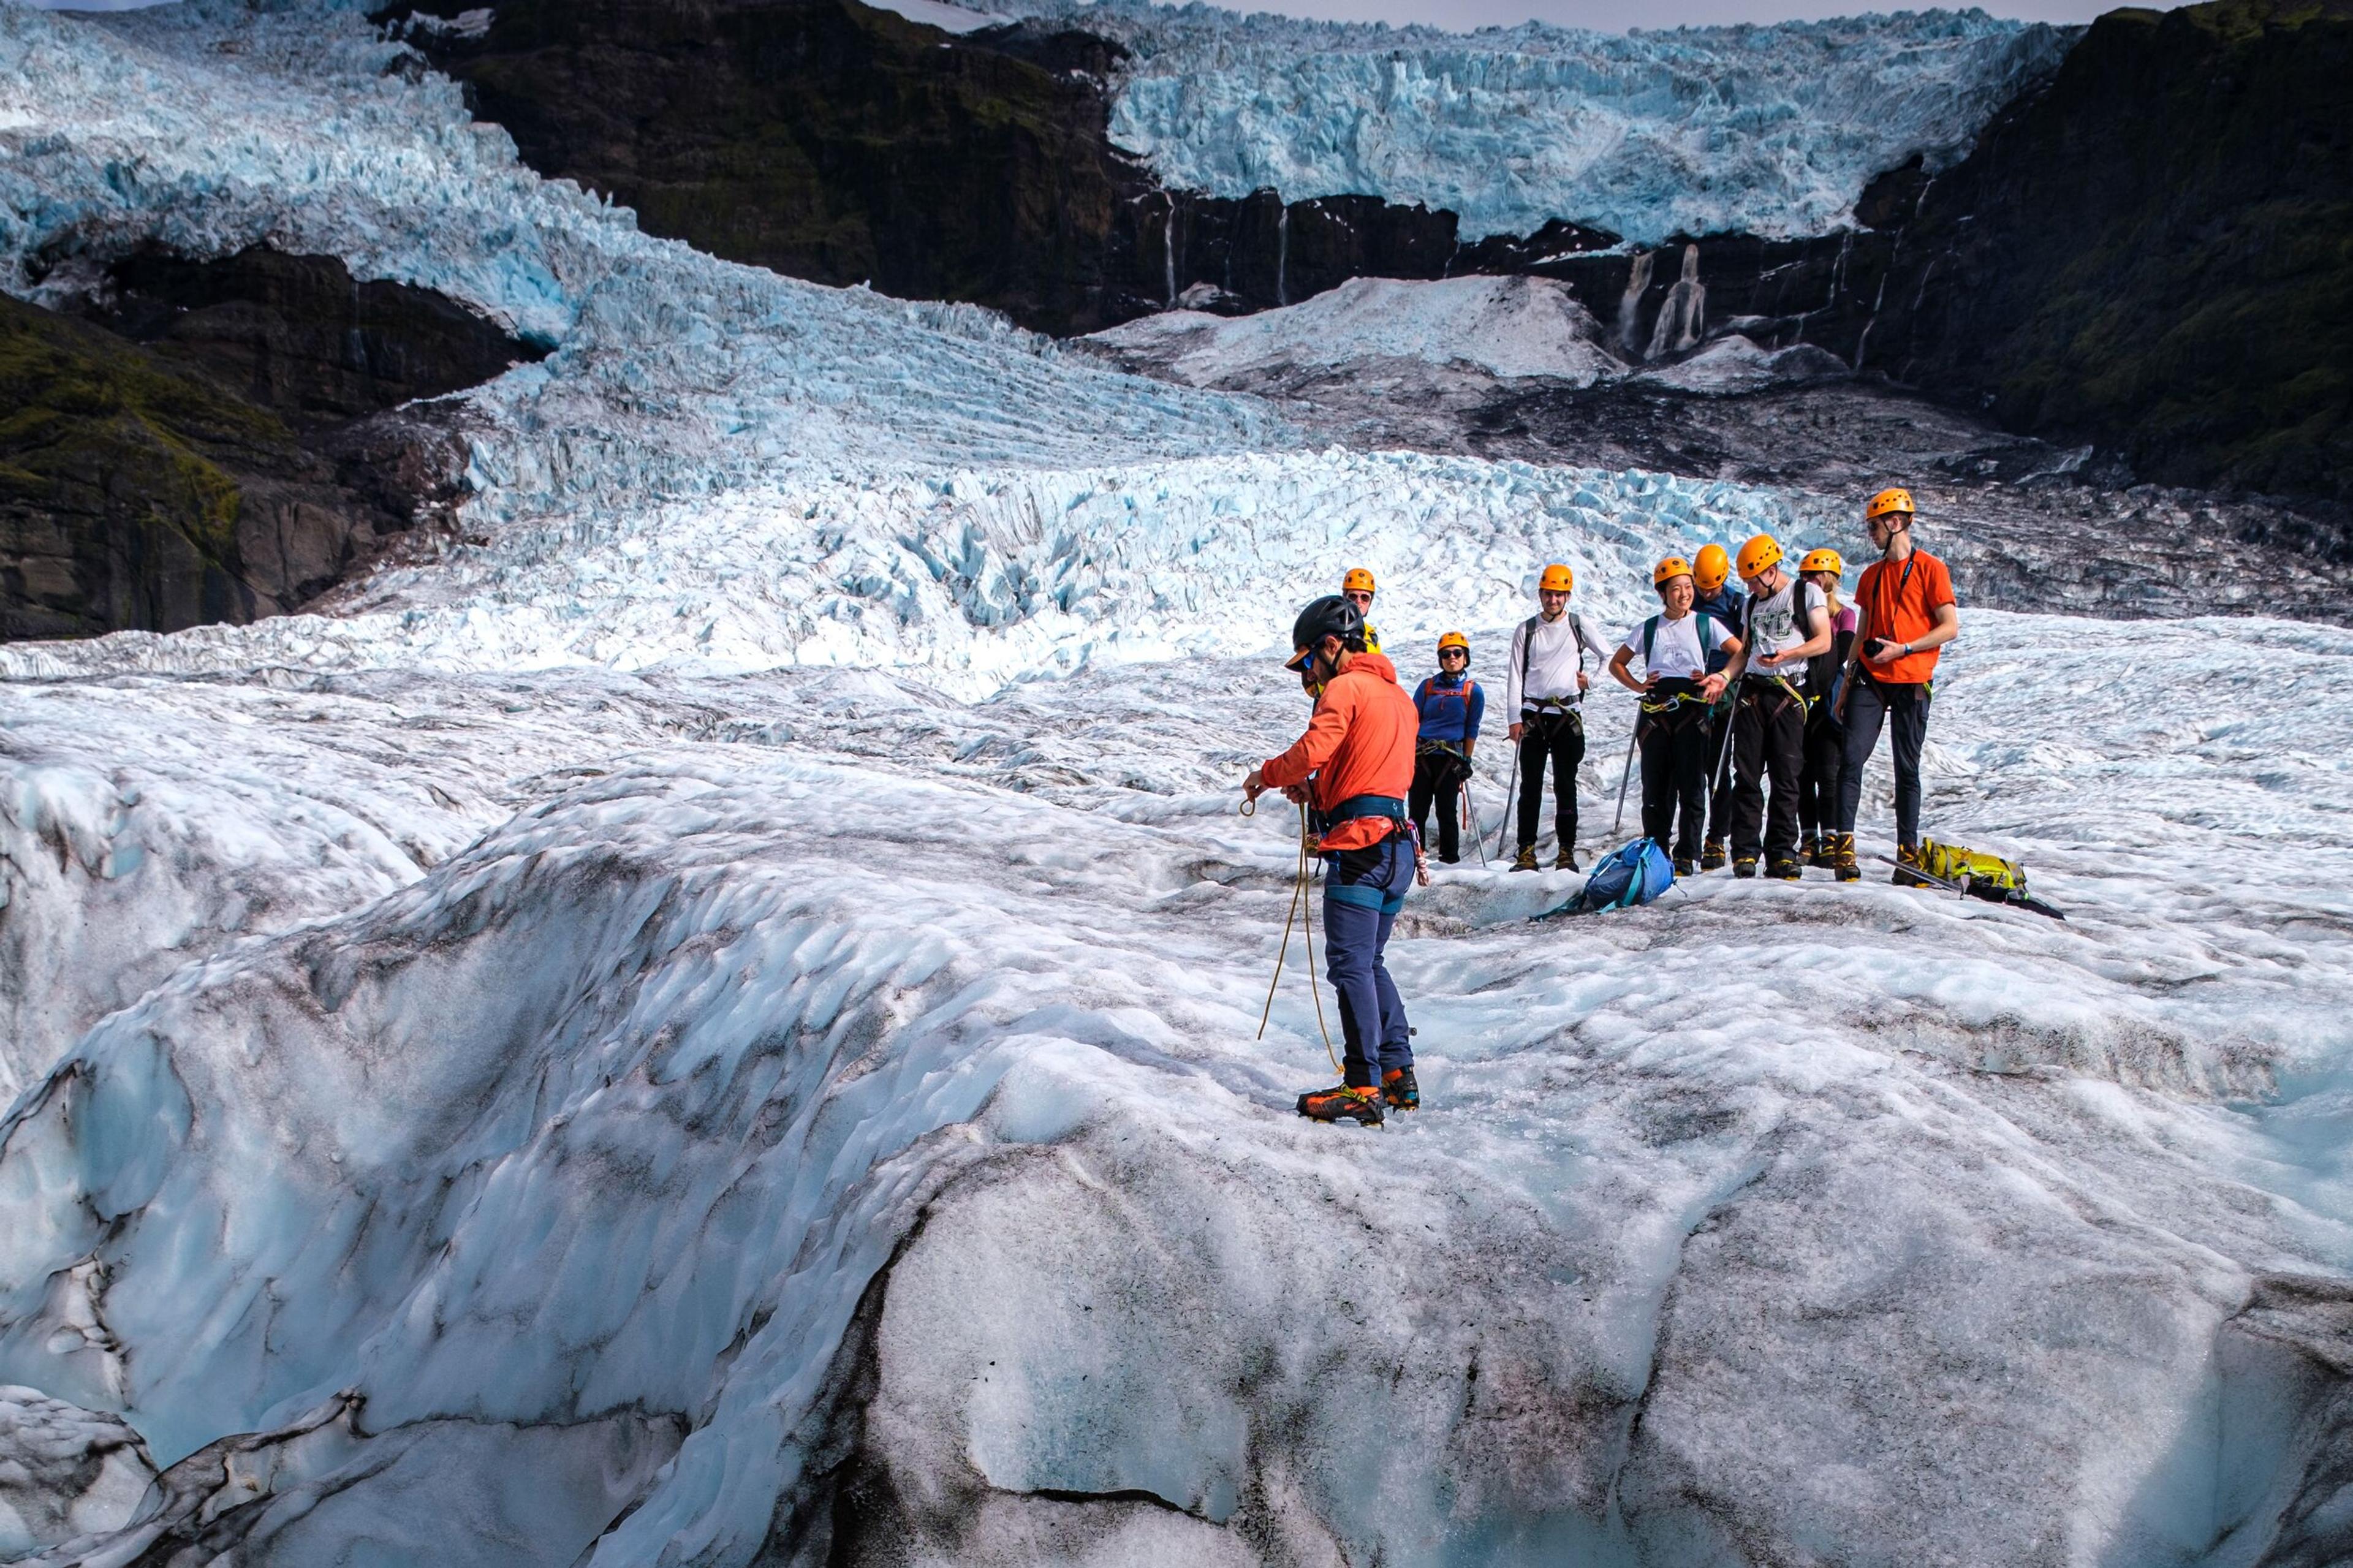 A guide on the Skaftafell Glacier explaining the geology of it to a group of tourists